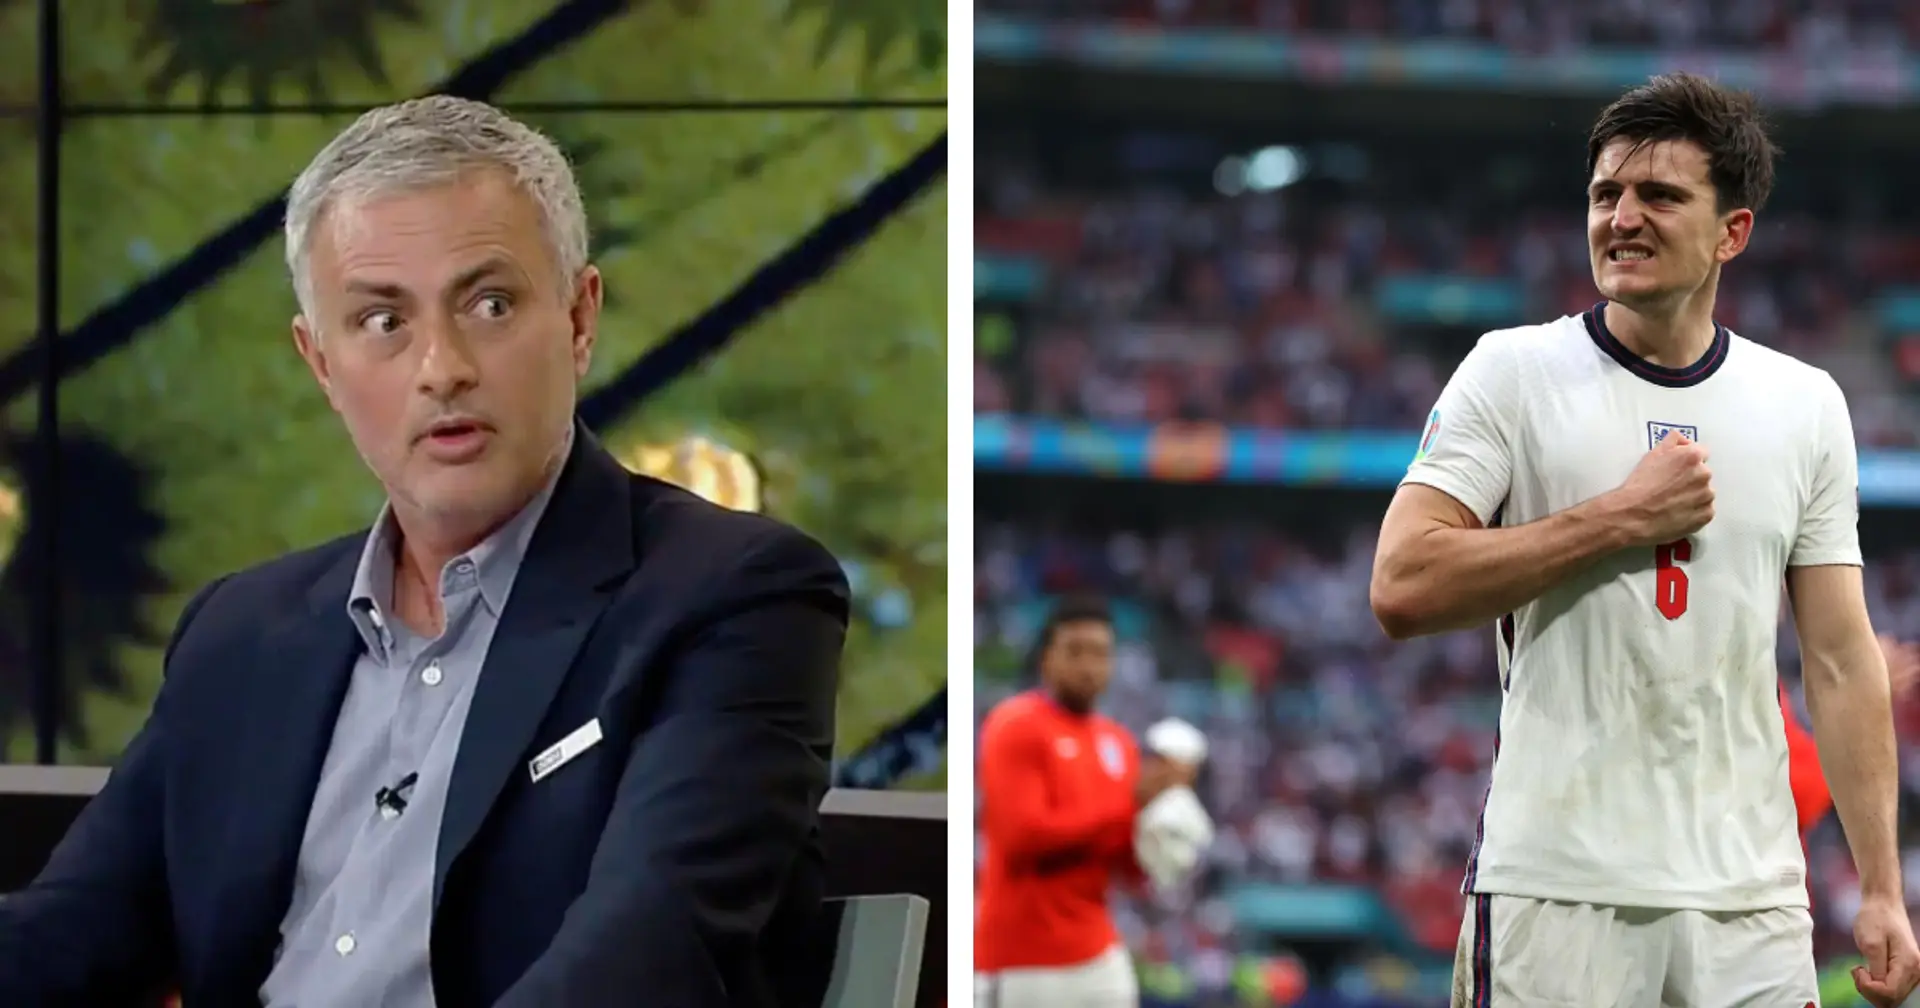 Jose Mourinho highlights Maguire's 'power in the leadership' as England stroll through Euro 2020